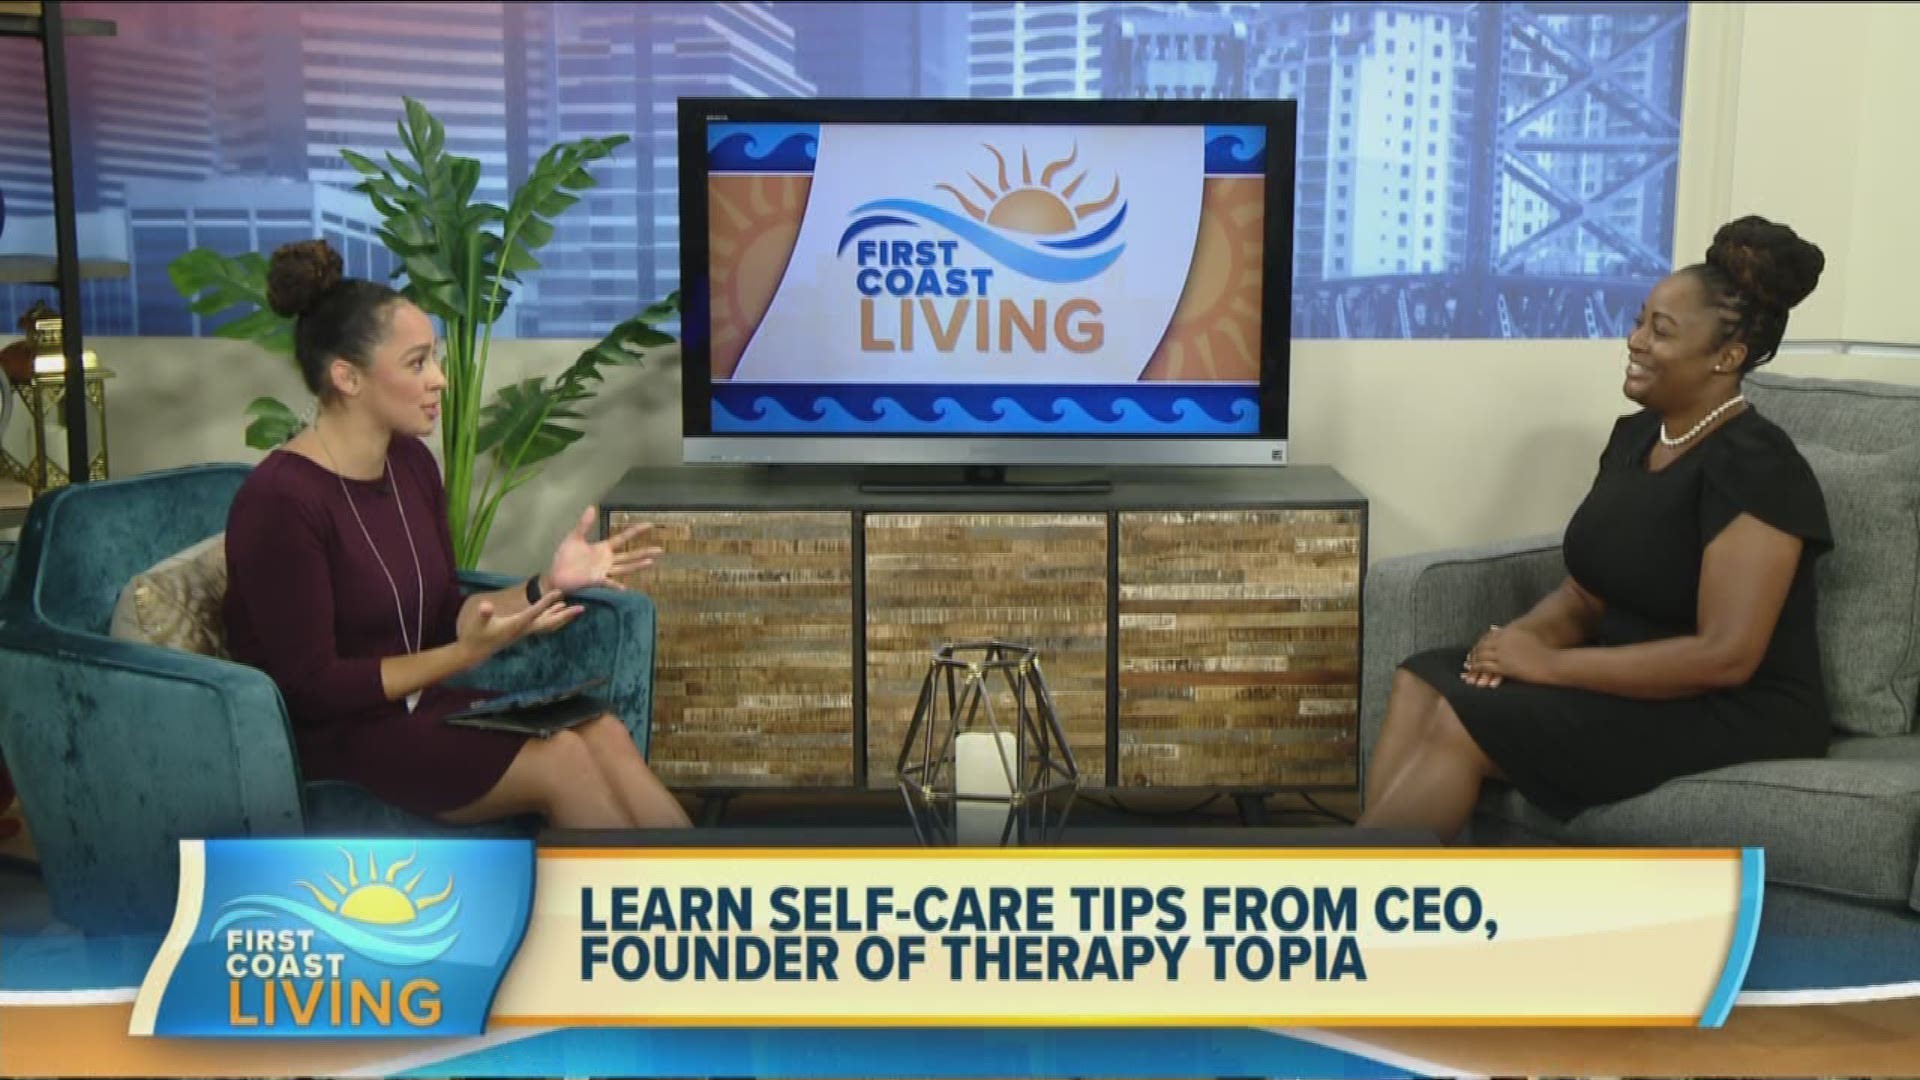 Therapy Topia is a relatively new business that specializes in helping busy professionals promote self care.